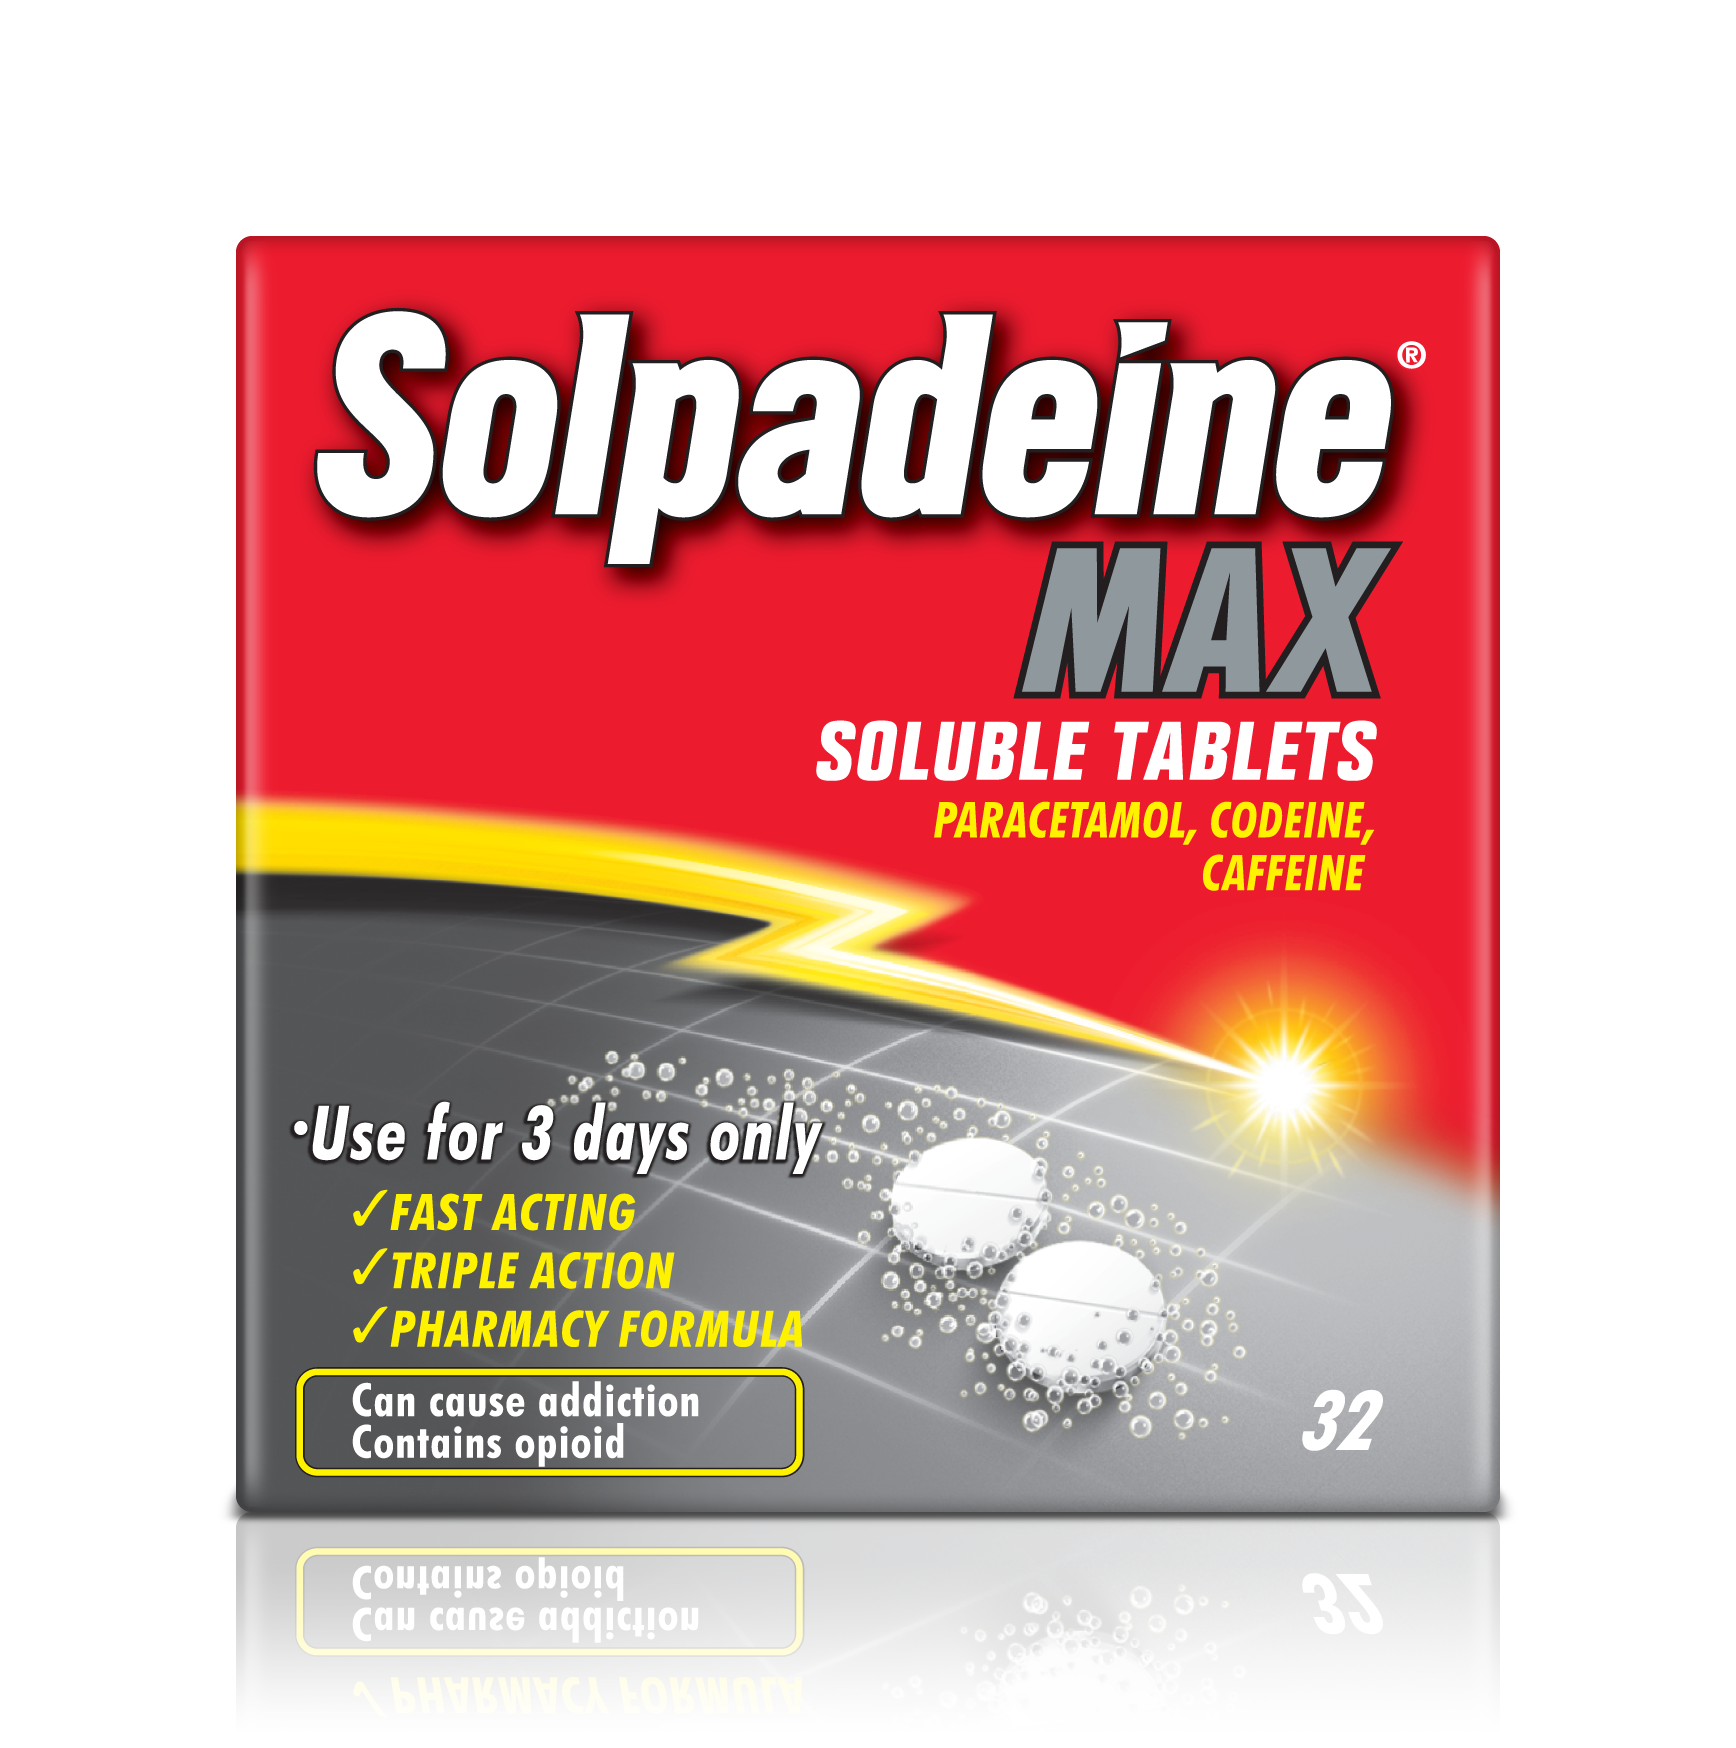 Solpadeine MAX soluble tablets product packaging